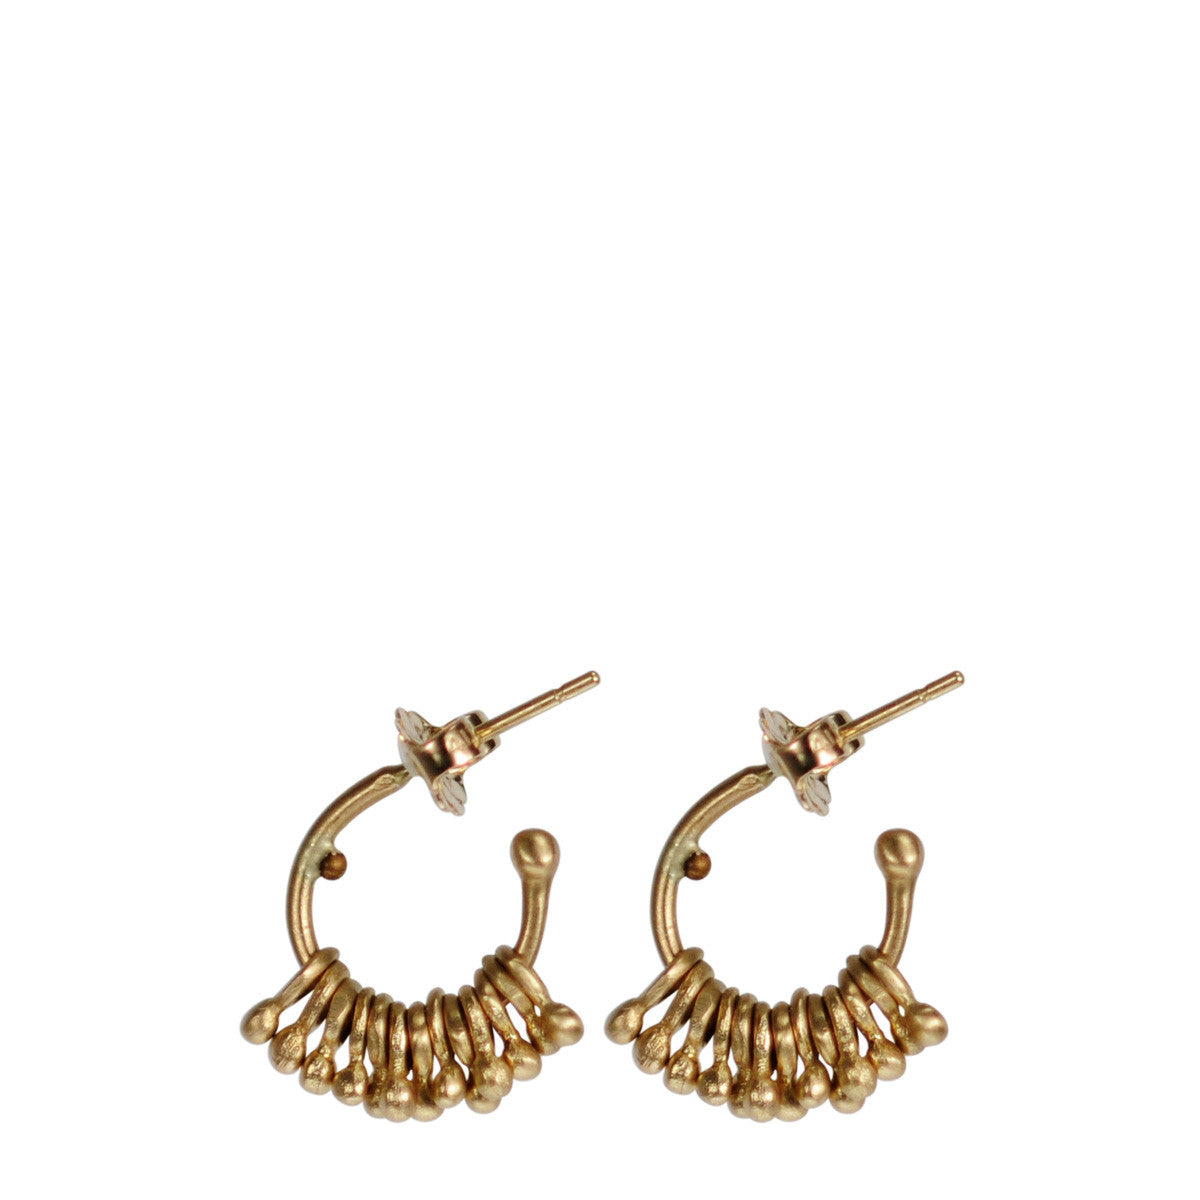 10K Gold Tiny Jumpring with Ball Hoop Earrings